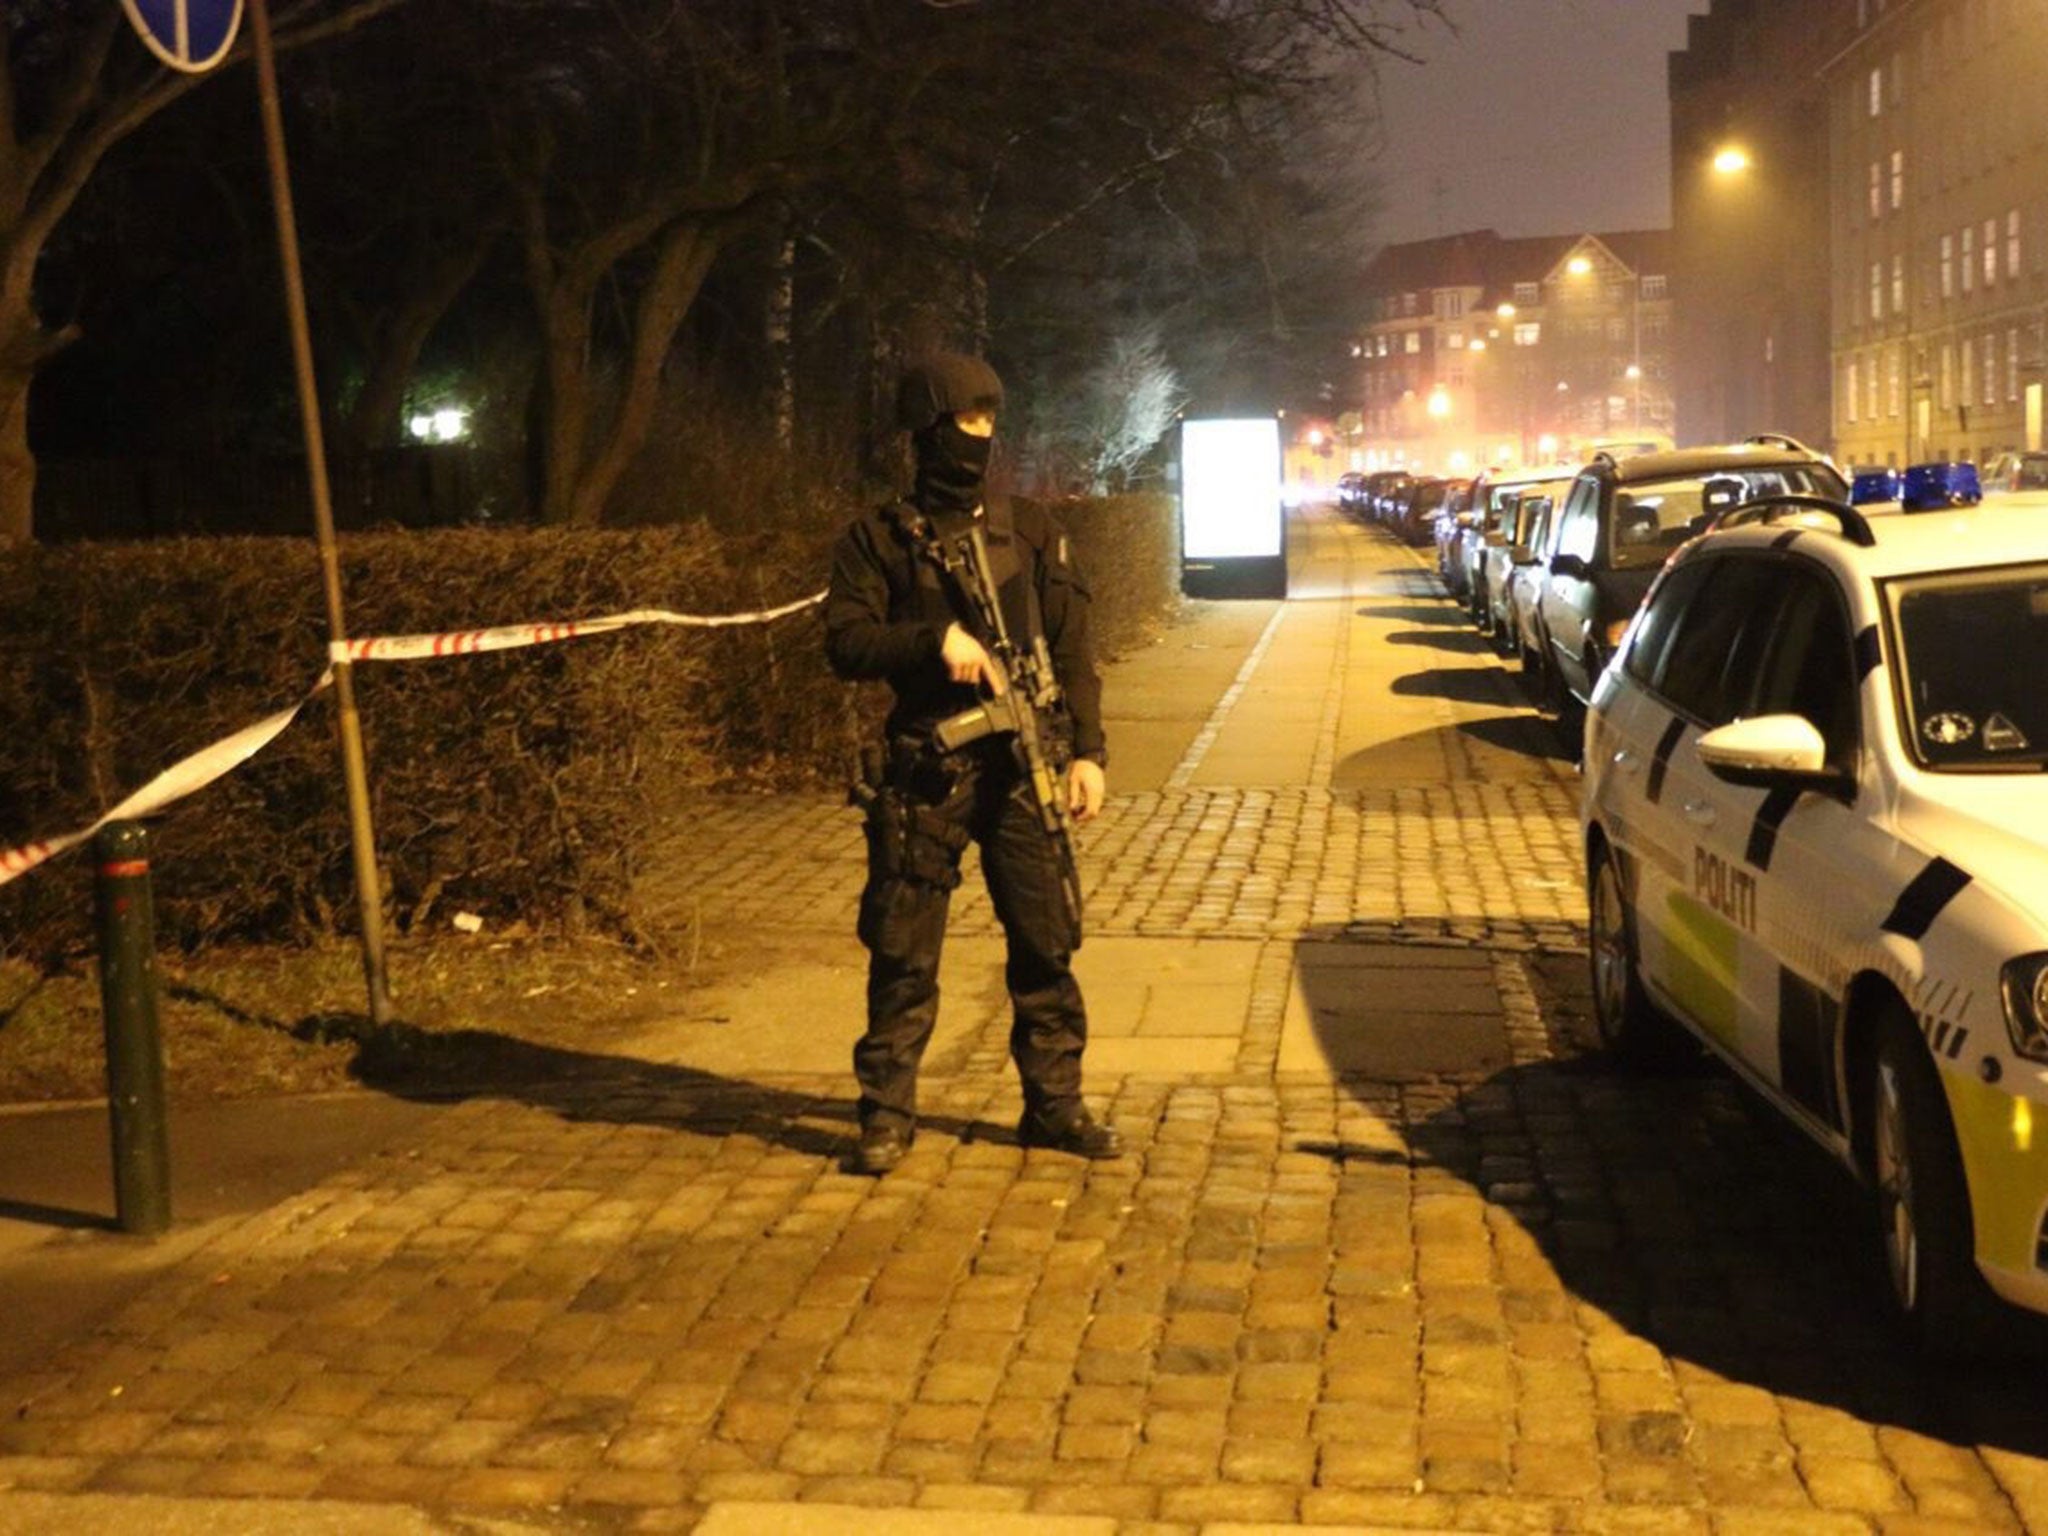 Copenhagen is on high alert after two shooting incidents in the city